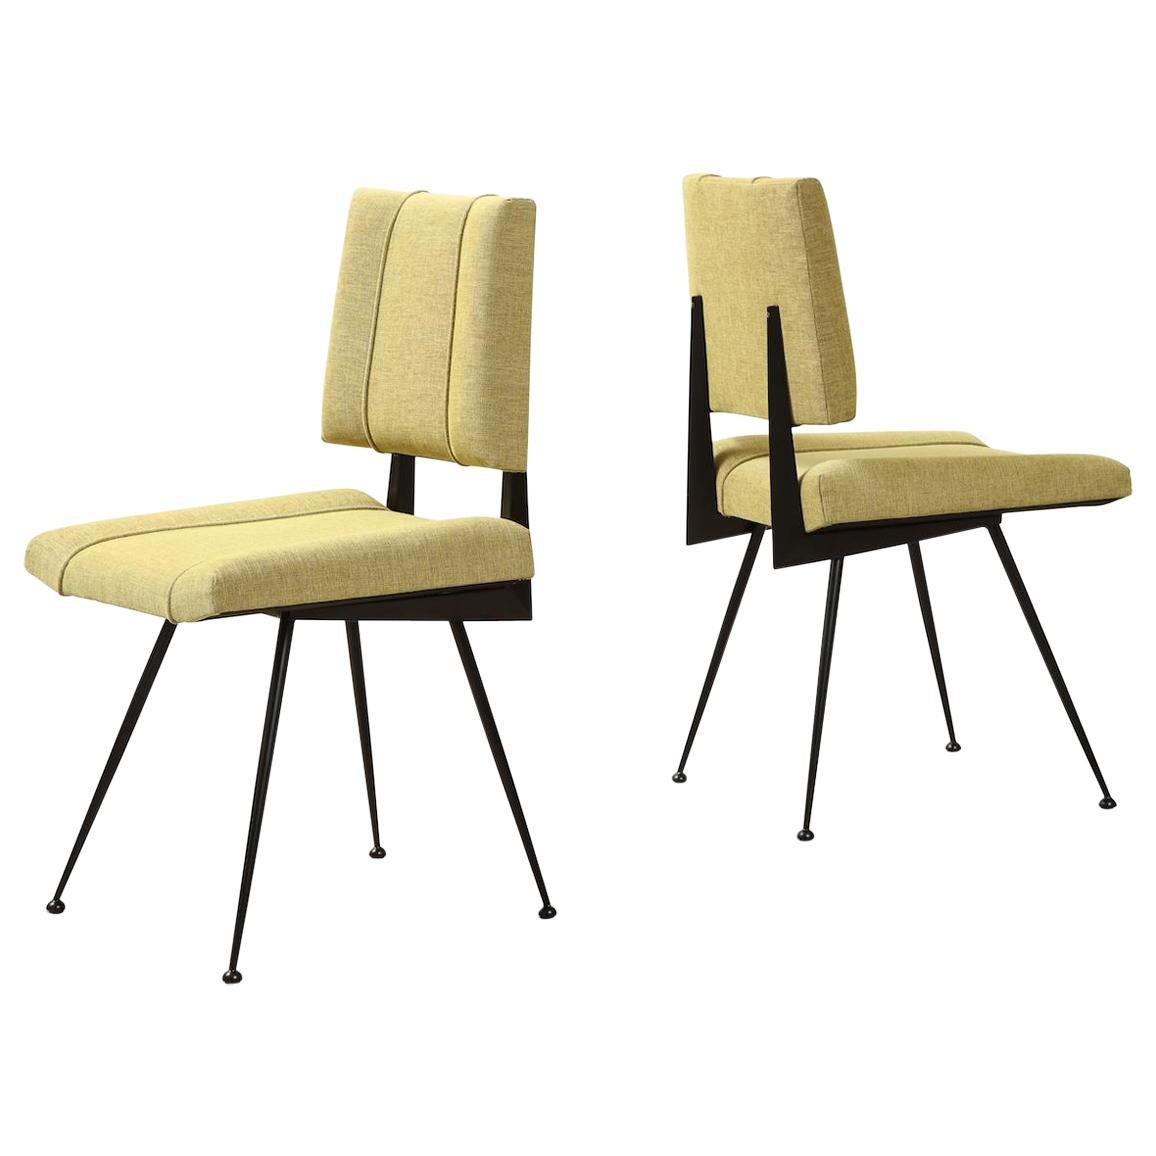 "Contour" Dining Chair by Donzella For Sale